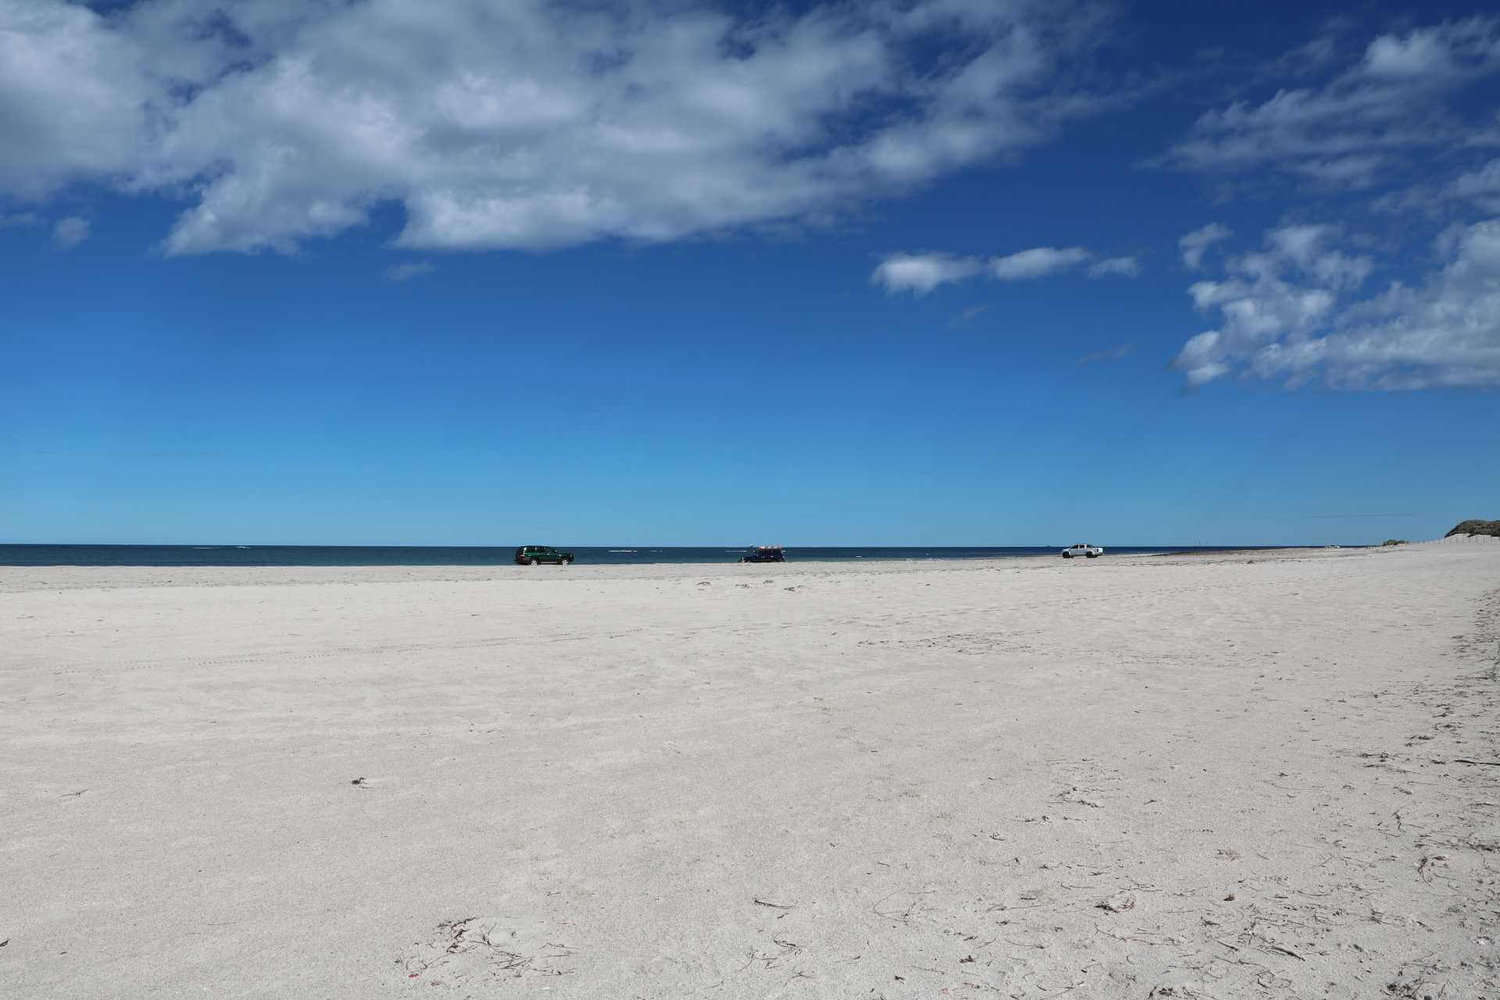 A vast, white sandy beach extends to the calm blue ocean under a sky scattered with clouds, with a few 4WD vehicles parked in the distance. This spacious beach setting is perfect for adventurers seeking free camping spots along the Geraldton coast.